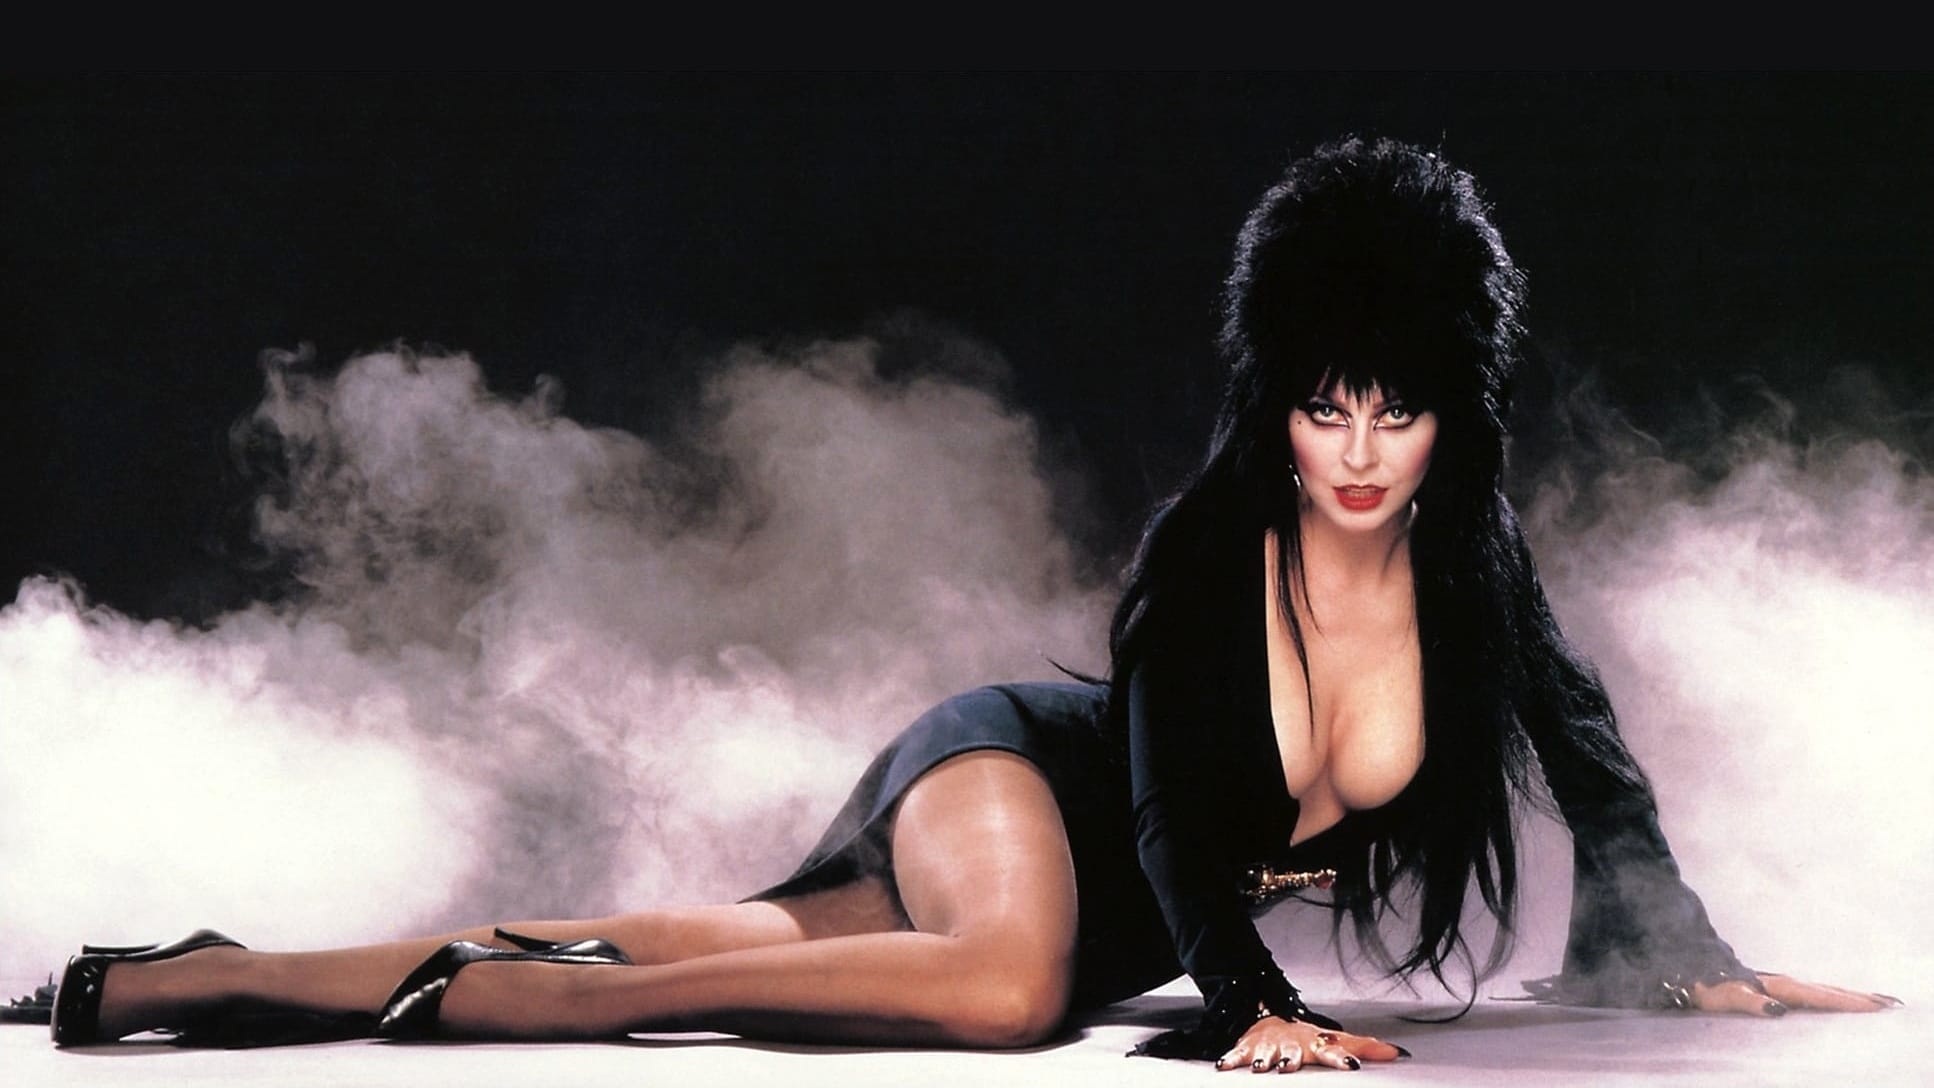 Too Macabre: The Making of Elvira, Mistress of the Dark 2018 123movies